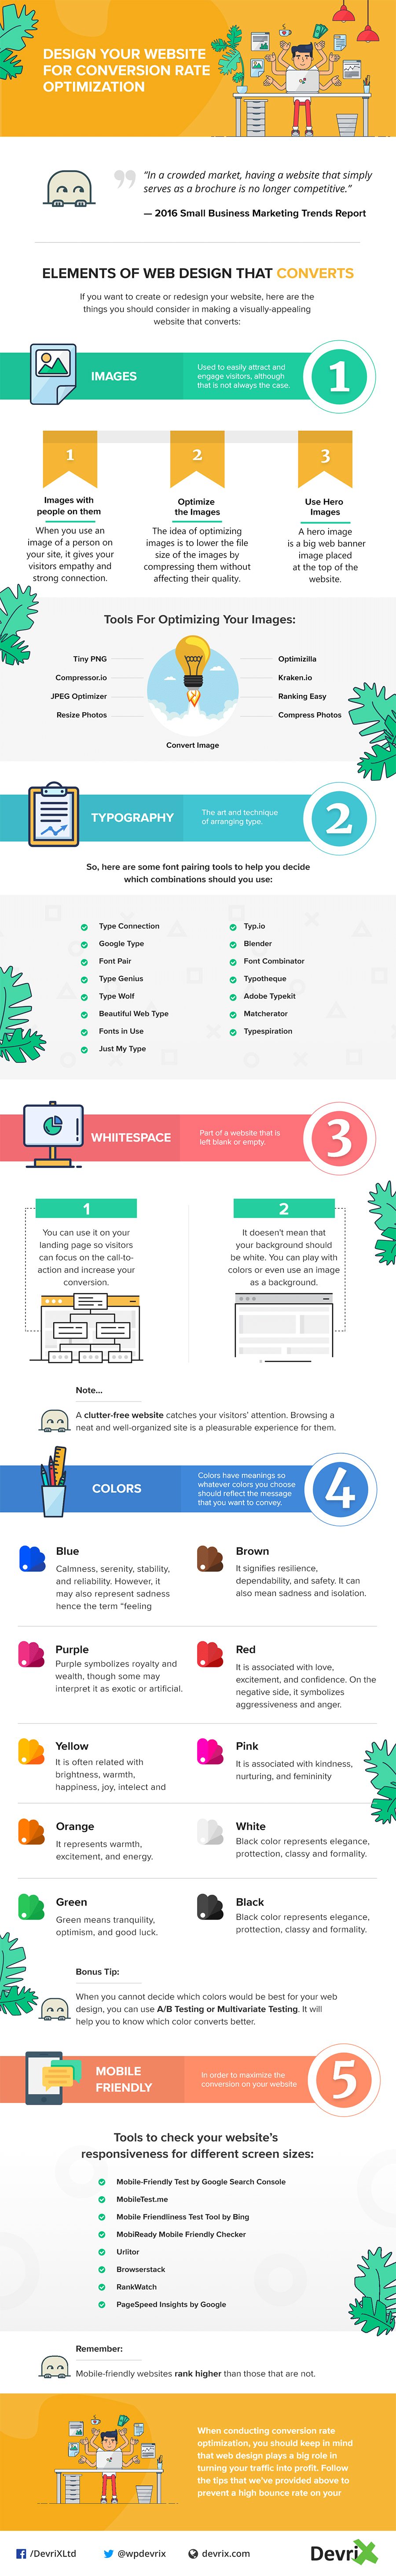 5 Website Elements You Must Optimise to Increase Your Conversion Rate